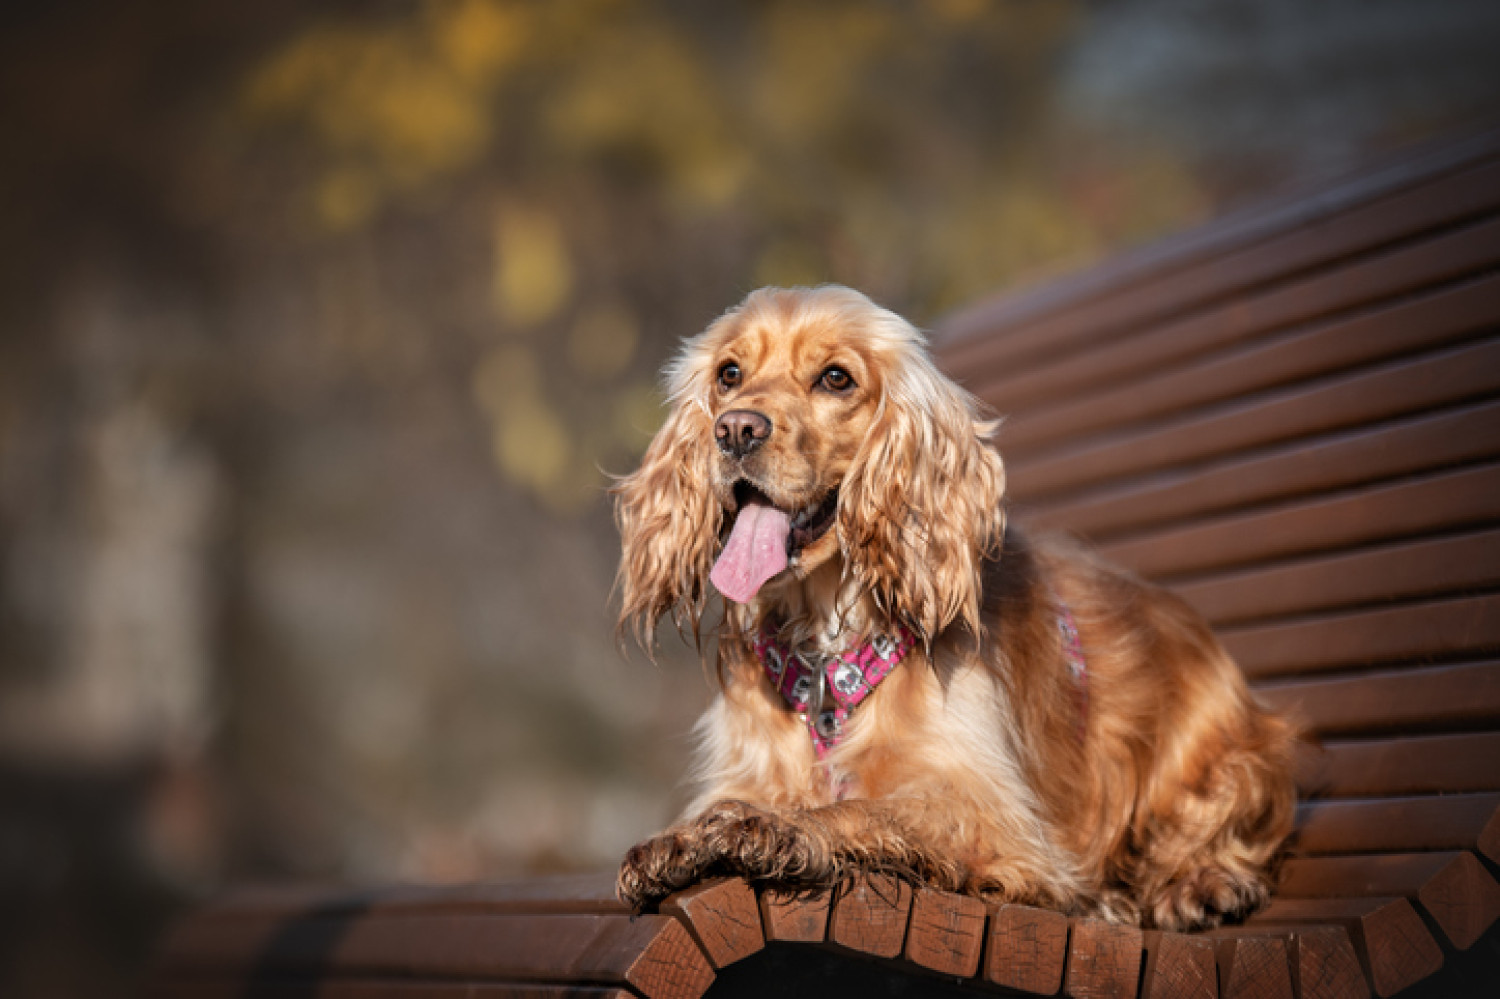 A golden Cocker Spaniel rests on a park bench, illustrating the breed's affectionate temperament, beneficial for emotional support in dementia care.